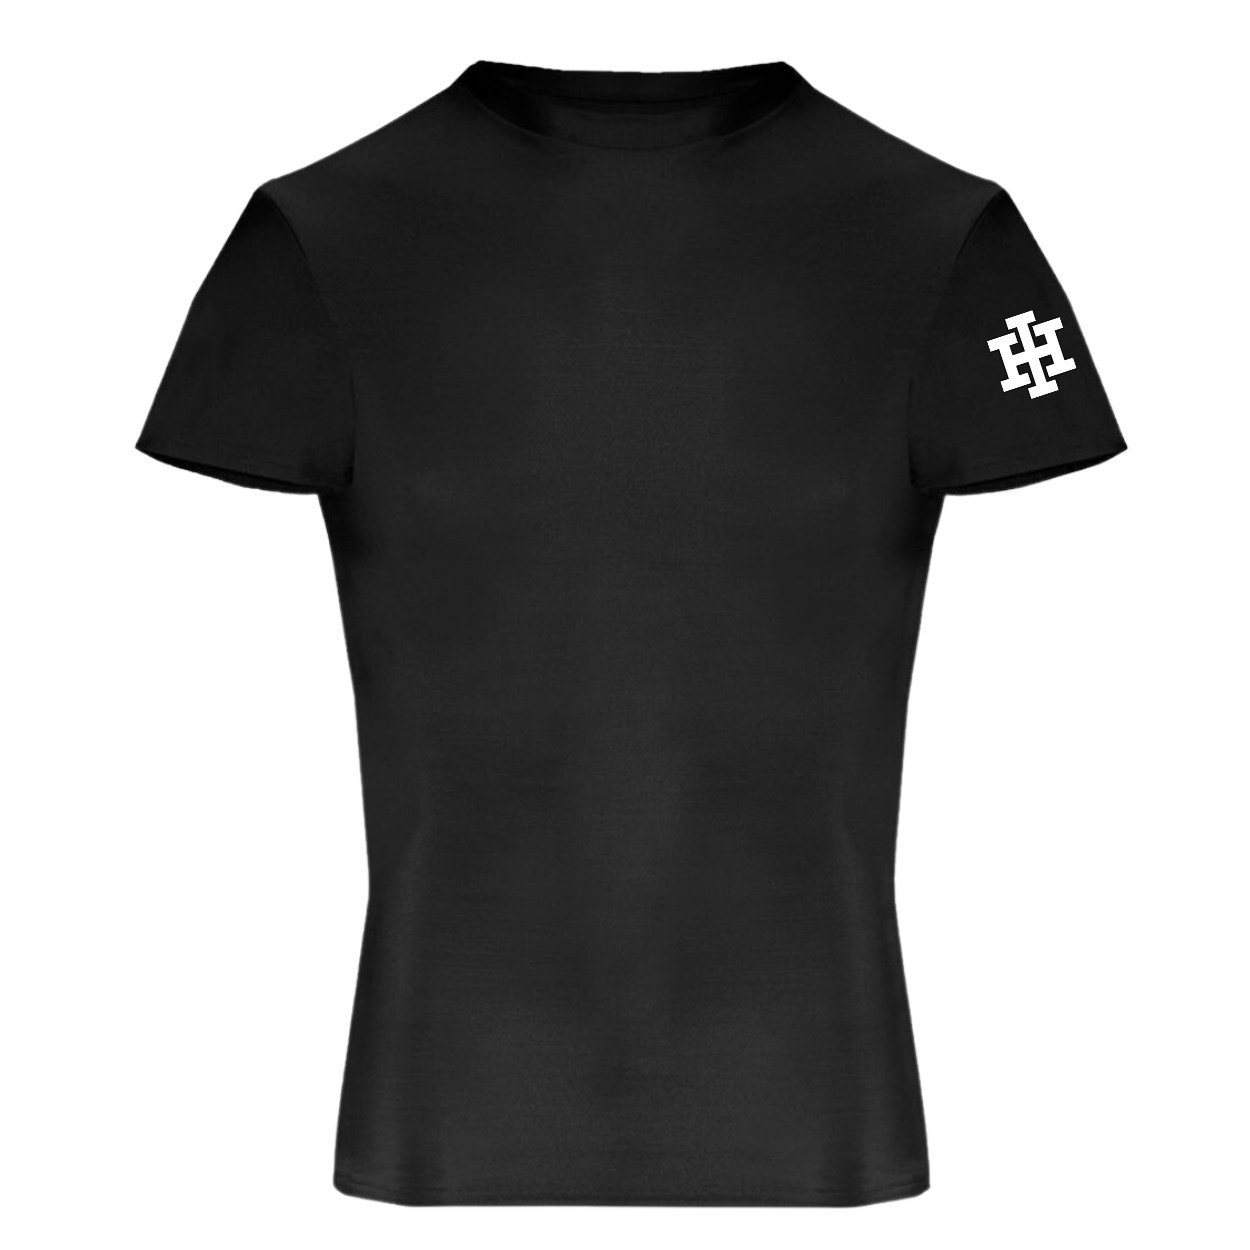 Badger Youth SS Compression T